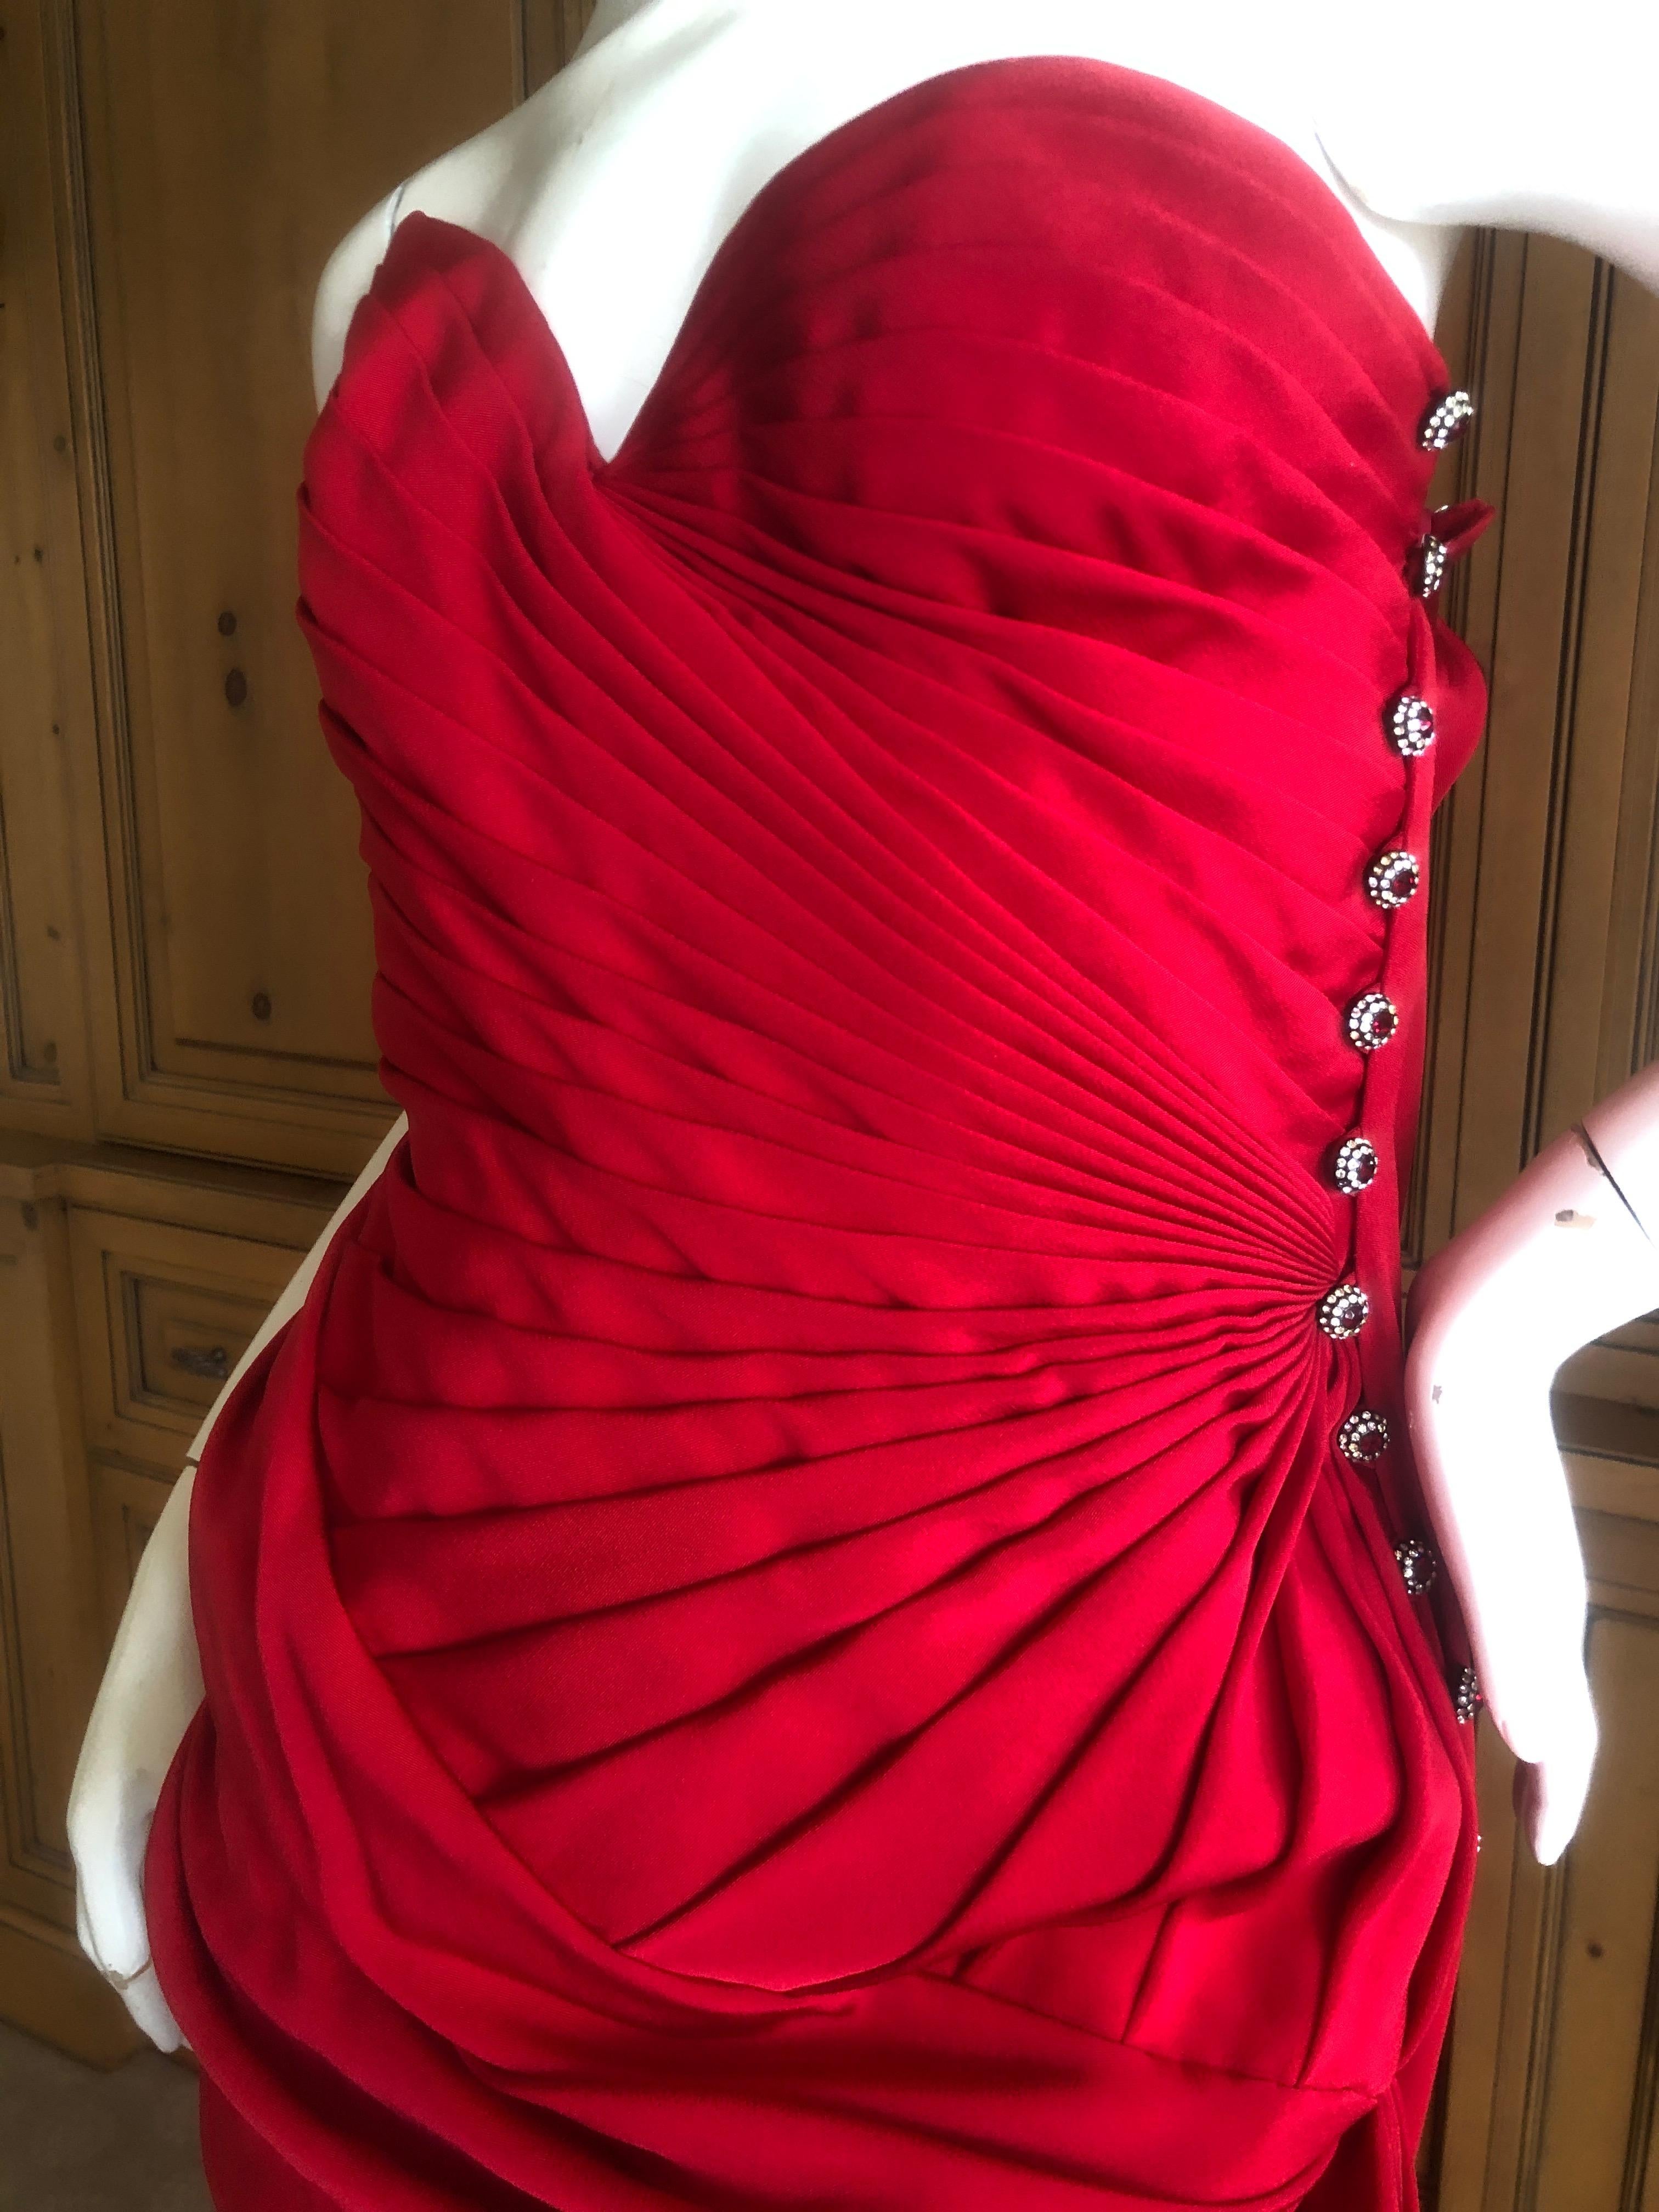 Emanuel Ungaro Numbered Haute Couture Fall 1984 Red  Strapless Evening Dress For Sale 1